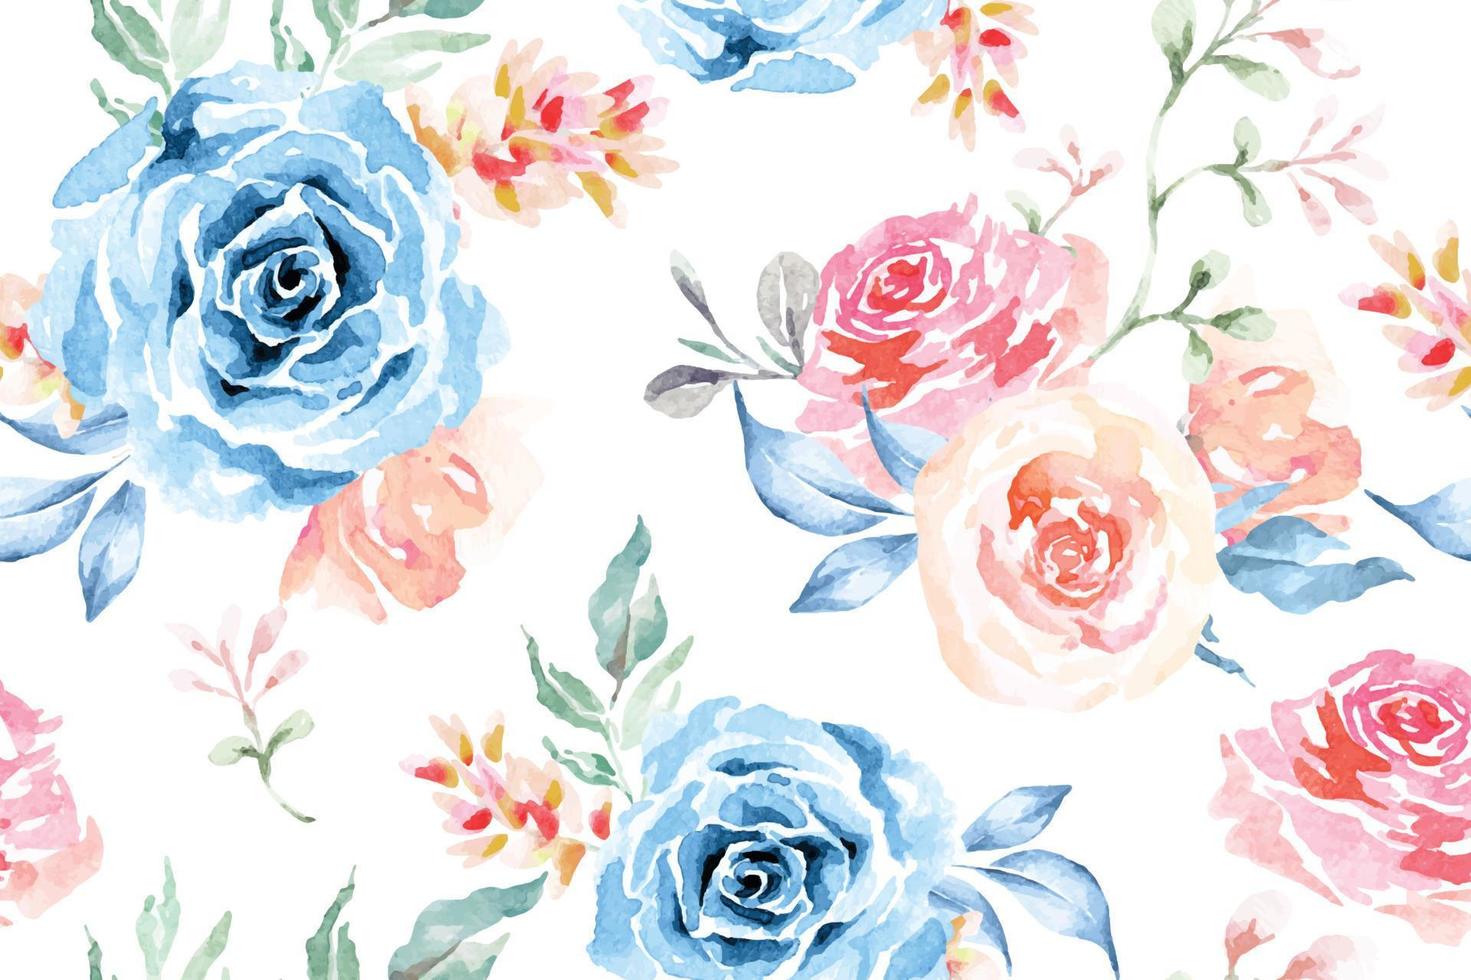 Rose seamless pattern with watercolor.Designed for fabric and wallpaper, vintage style.Hand drawn floral pattern.Blooming flower painting for summer.Botany background. vector